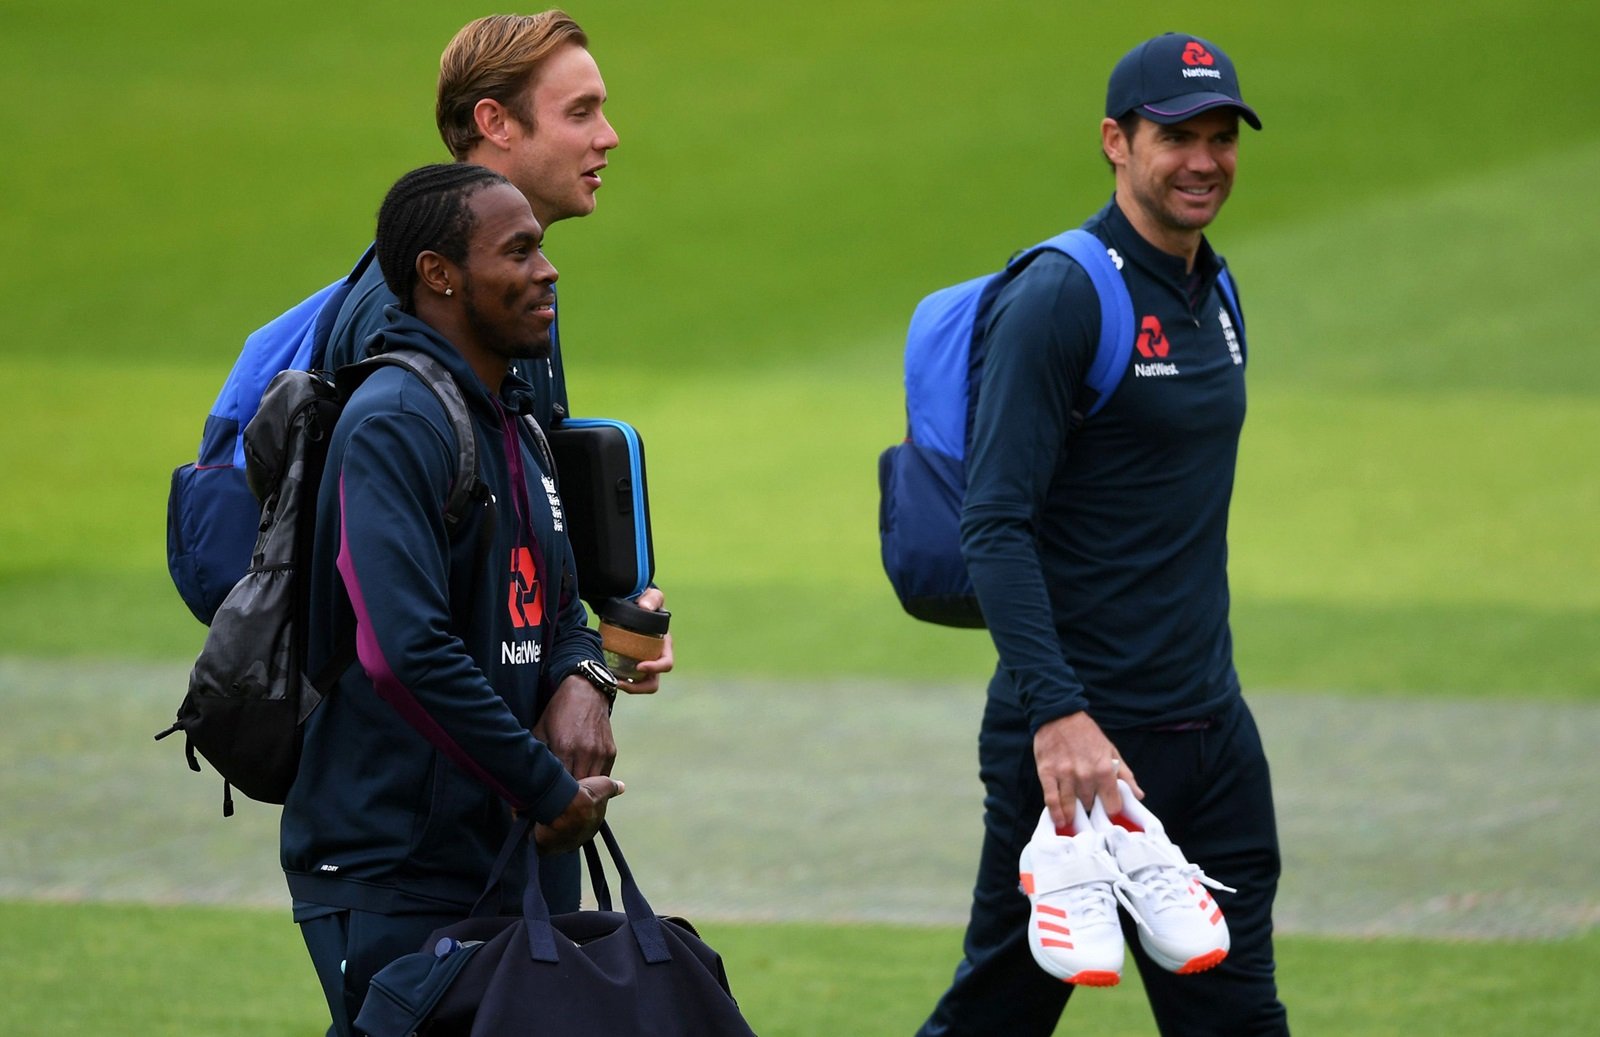 World Test Championship, James Anderson, Stuart Broad and Jofra Archer (Getty)